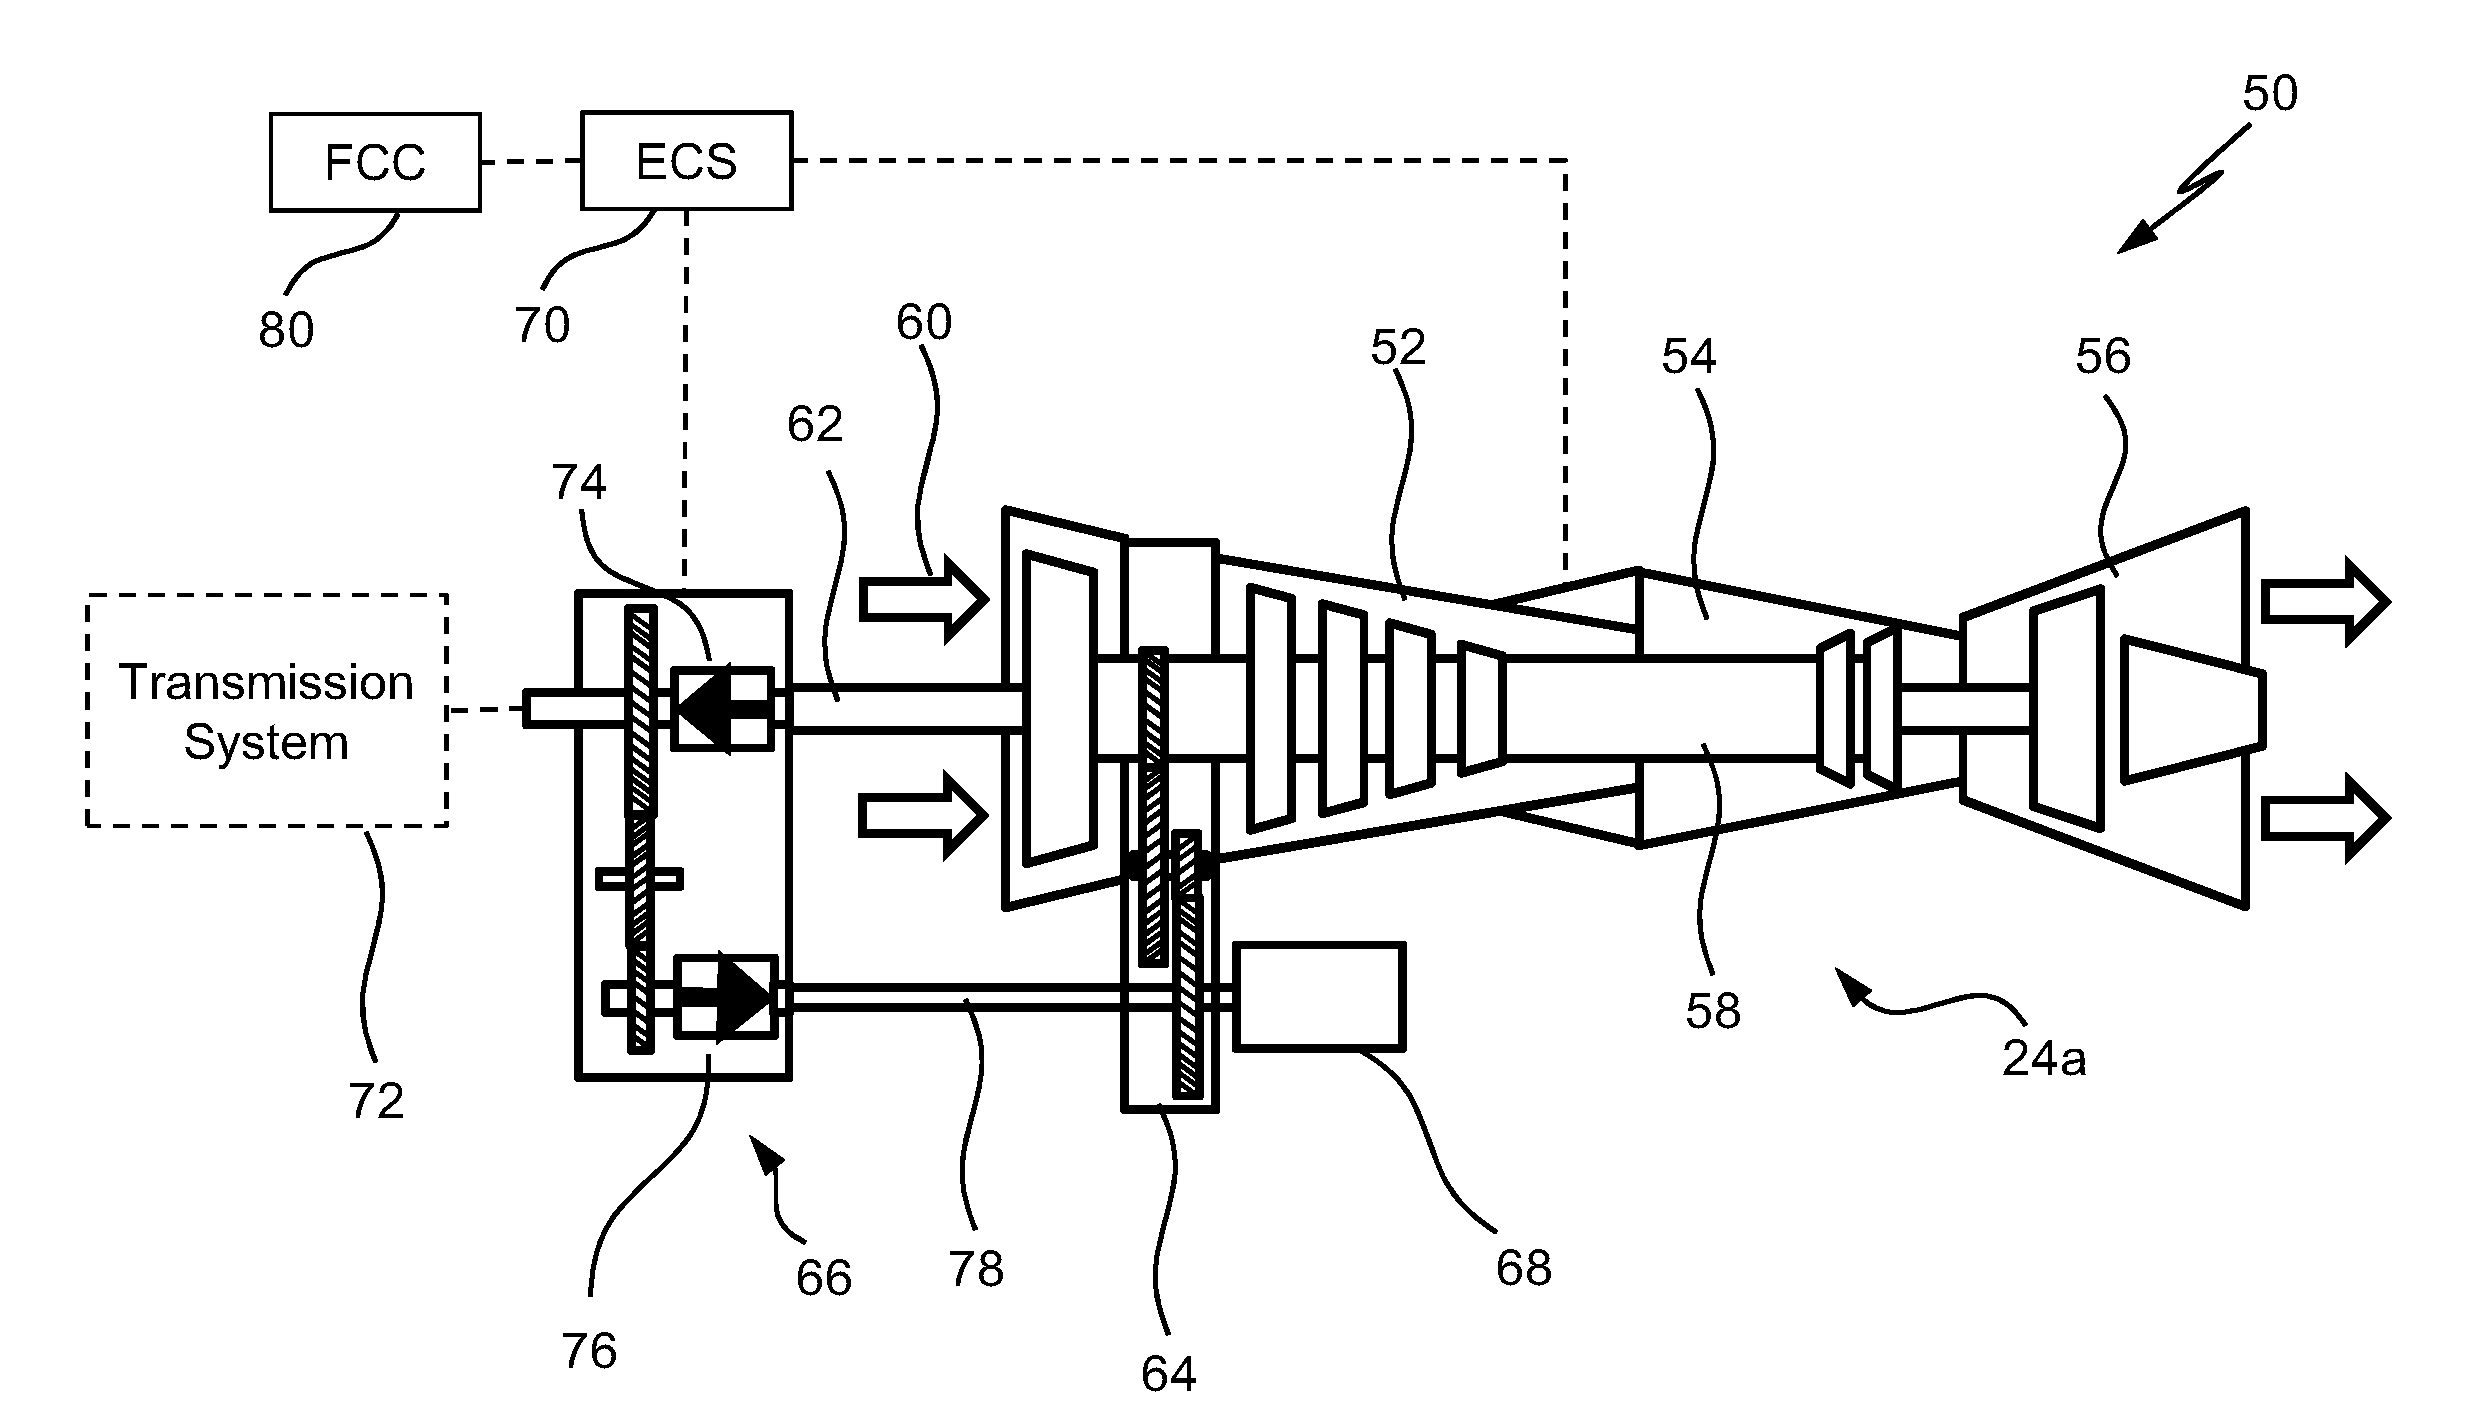 In-flight mechanically assisted turbine engine starting system